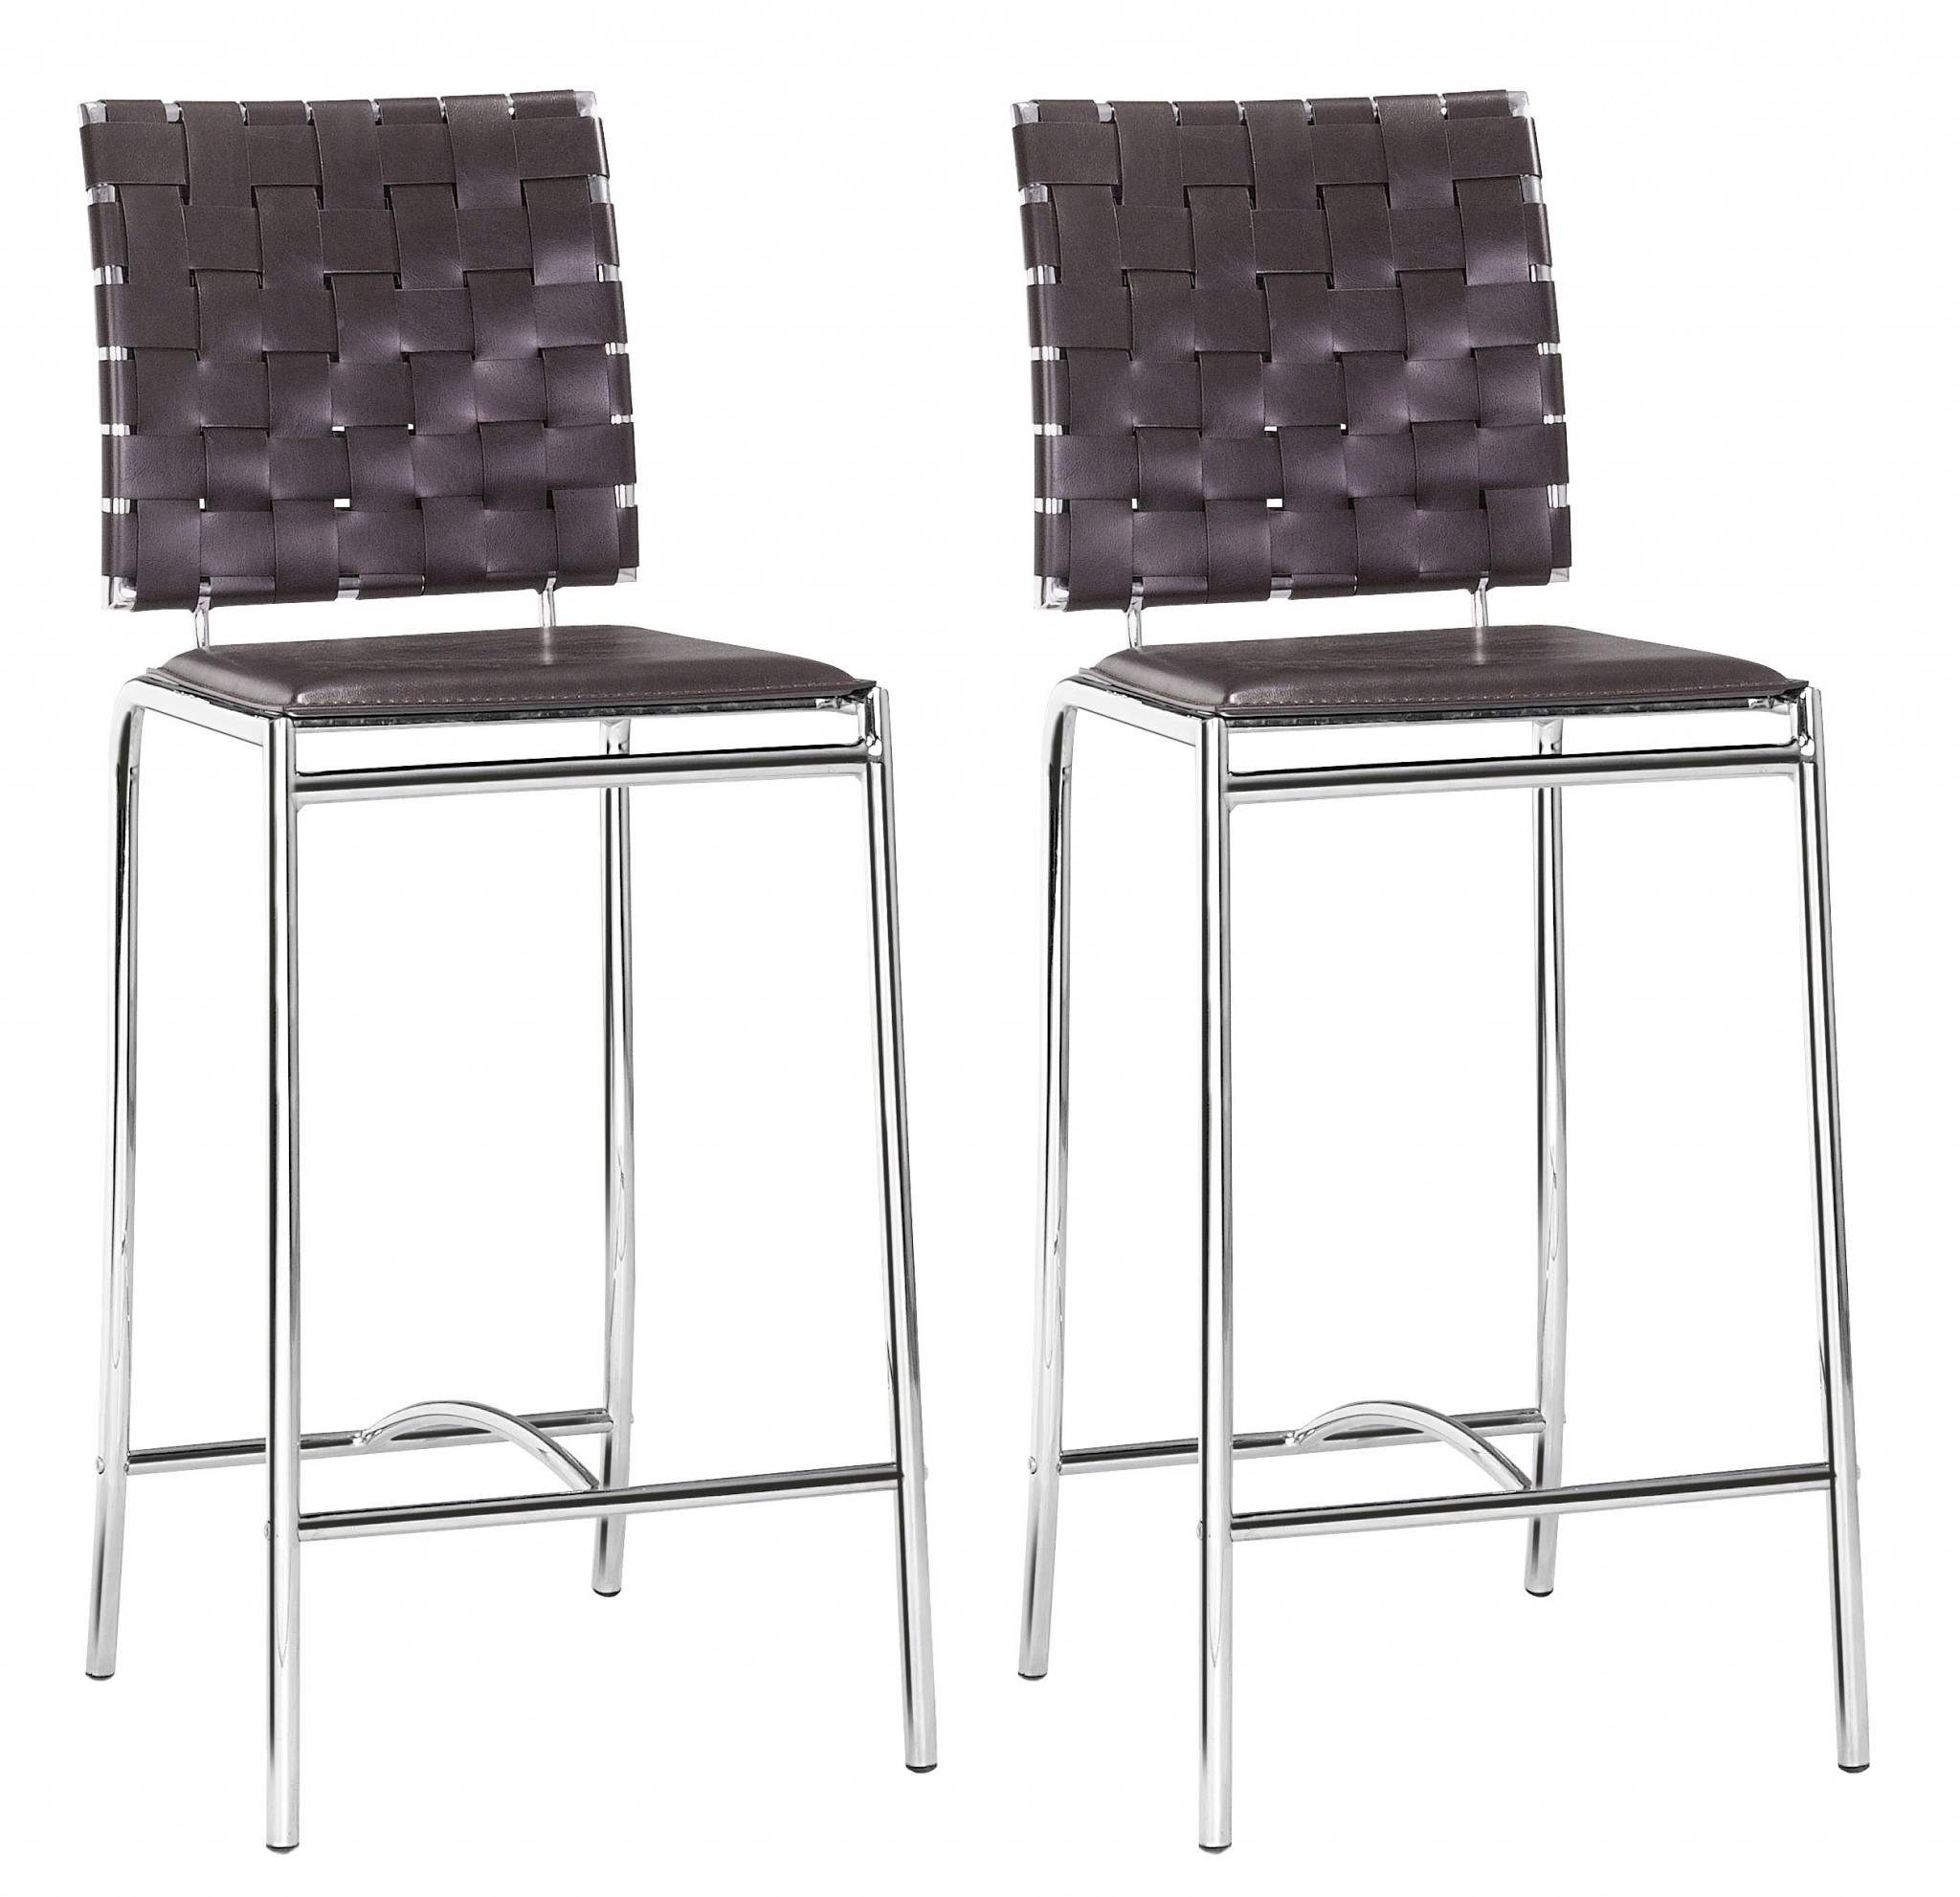 Set of Two Brown Faux Leather and Steel Modern Basket Weave Counter Height Chairs